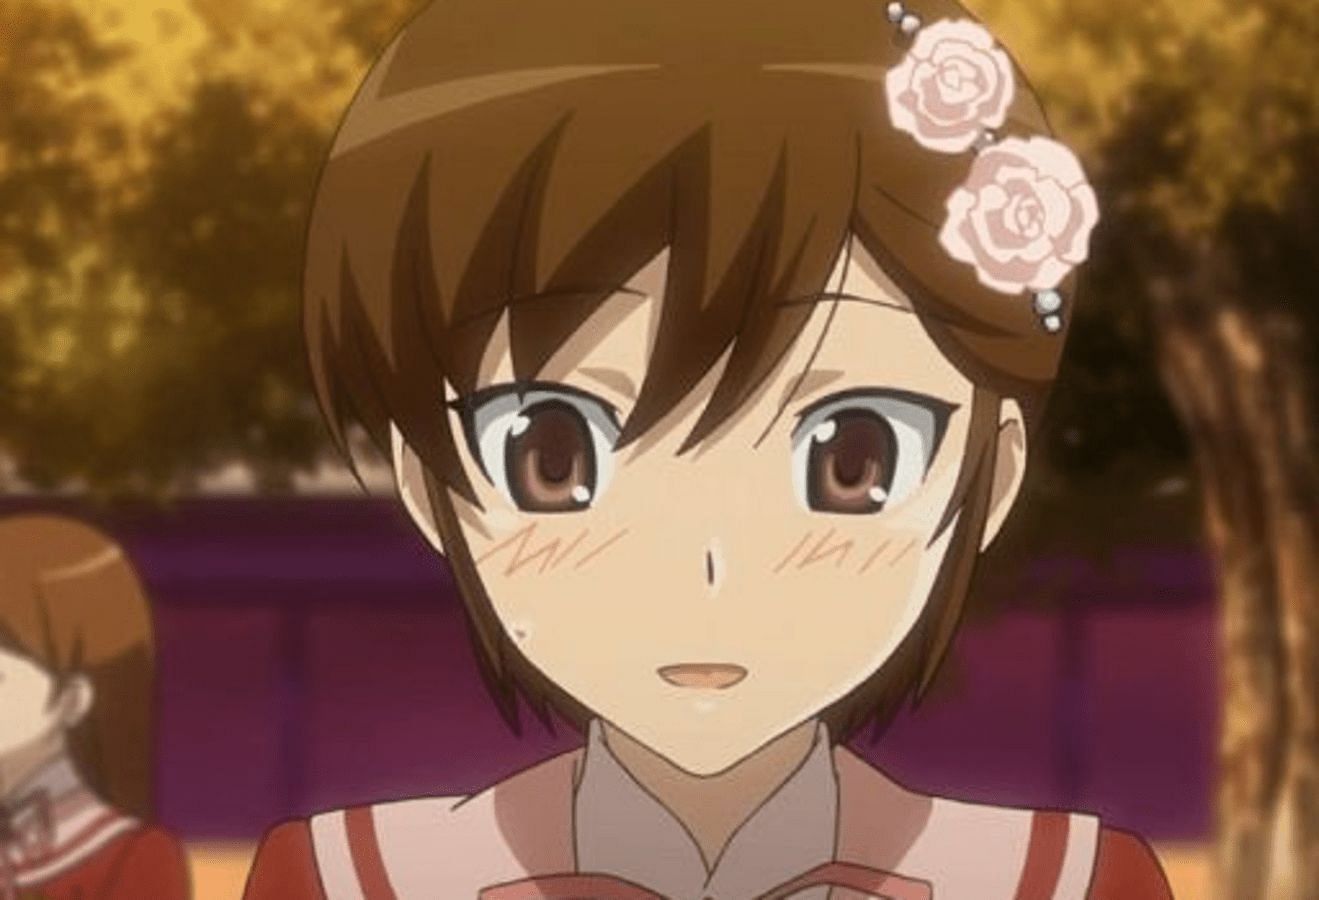 Chihiro Kosaka is one of the most memorable anime characters named Chihiro (Image via Manglobe)